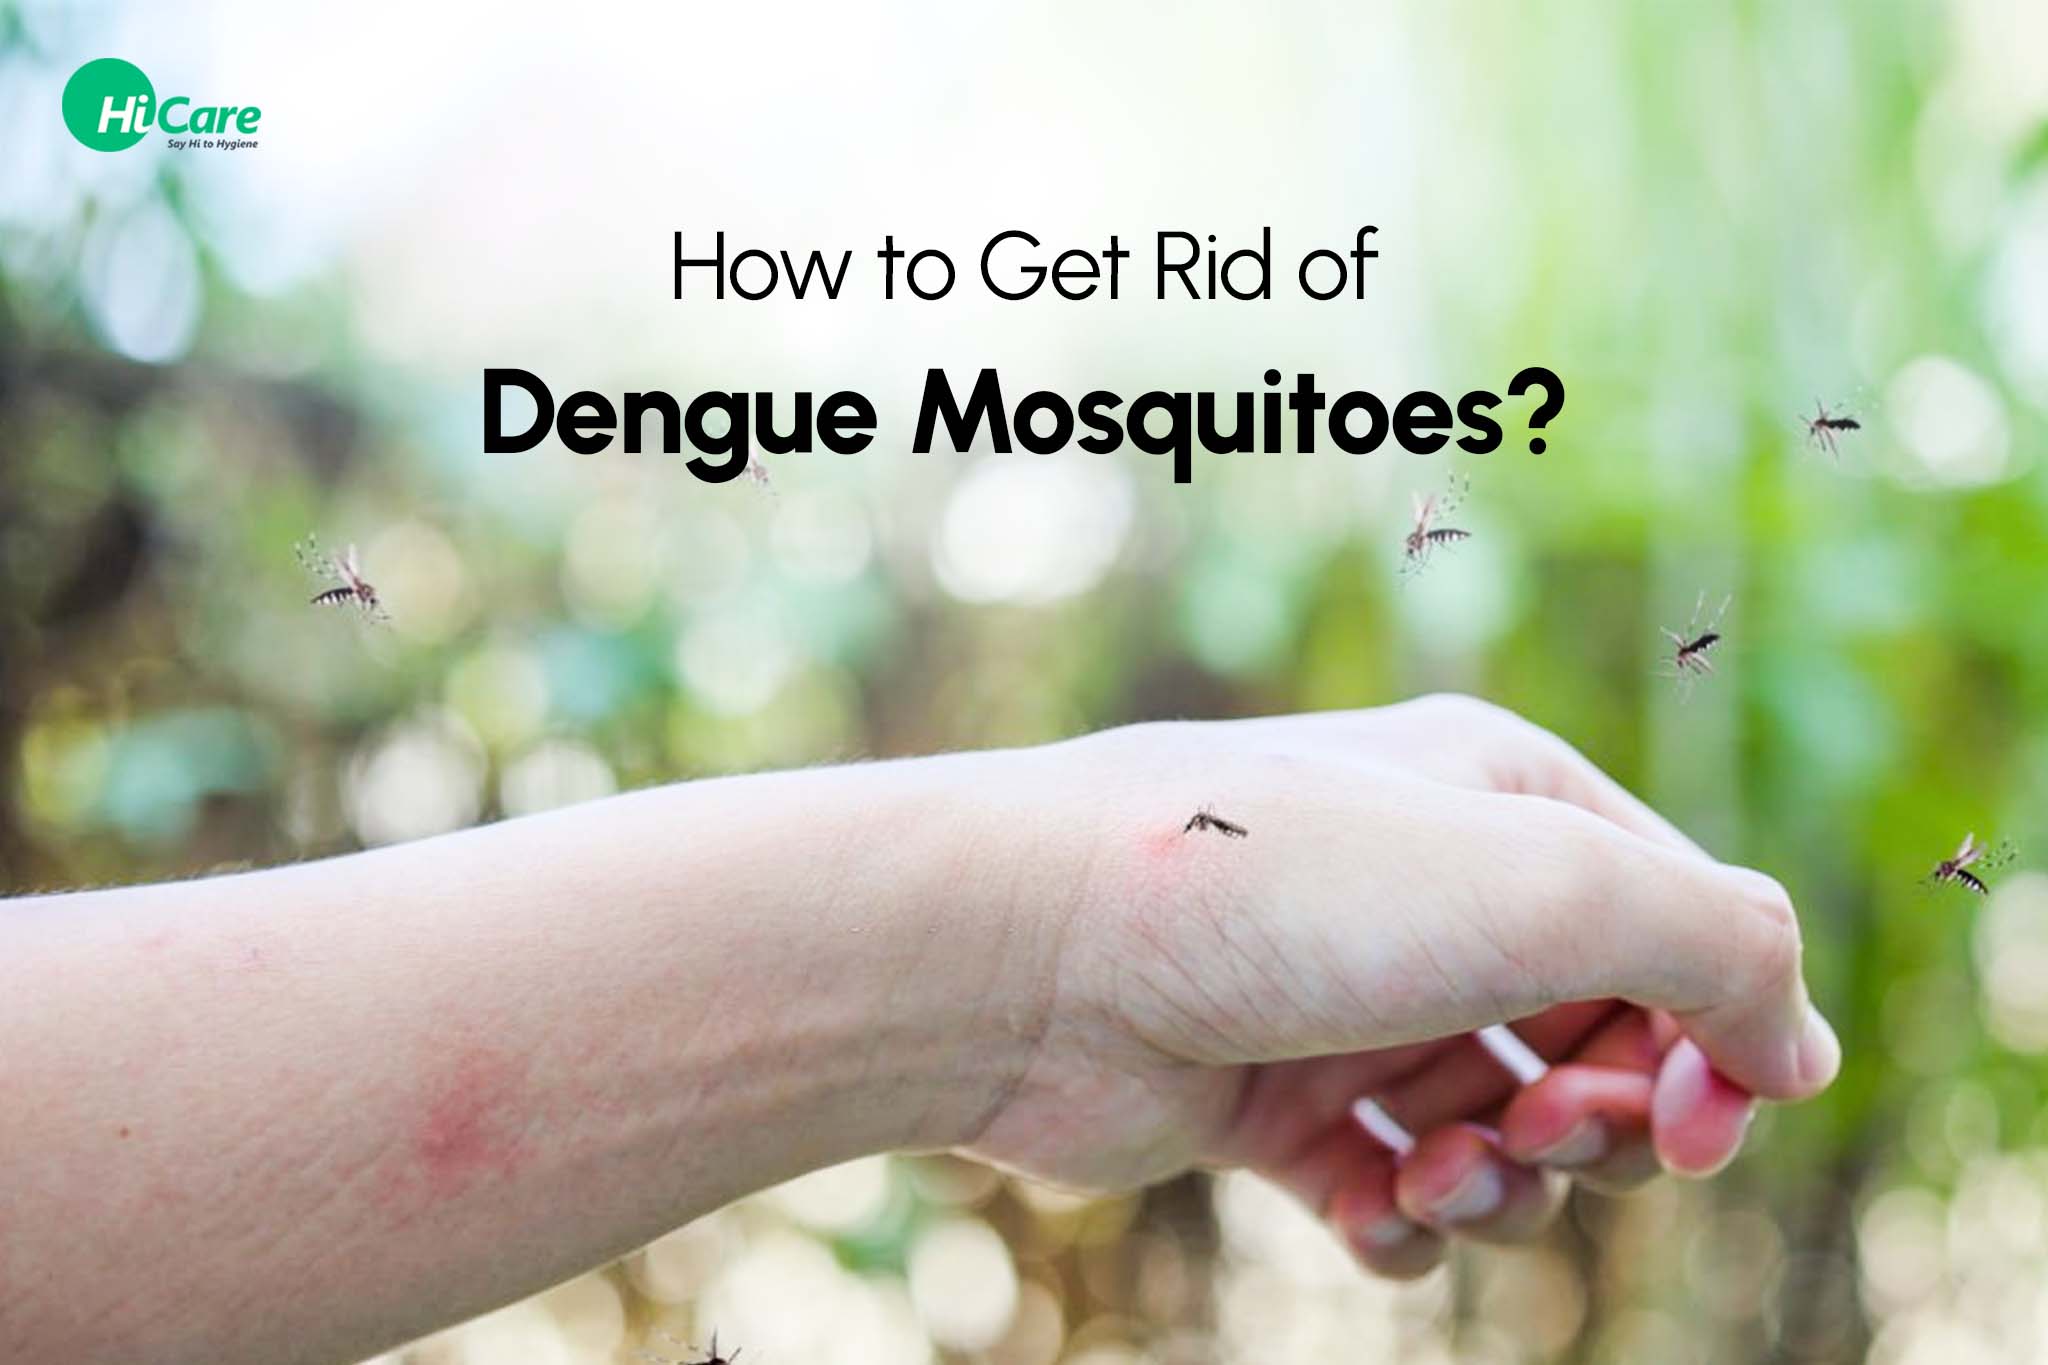 How to Get Rid of Dengue Mosquitoes: Know Causes, Symptoms & Prevention Tips